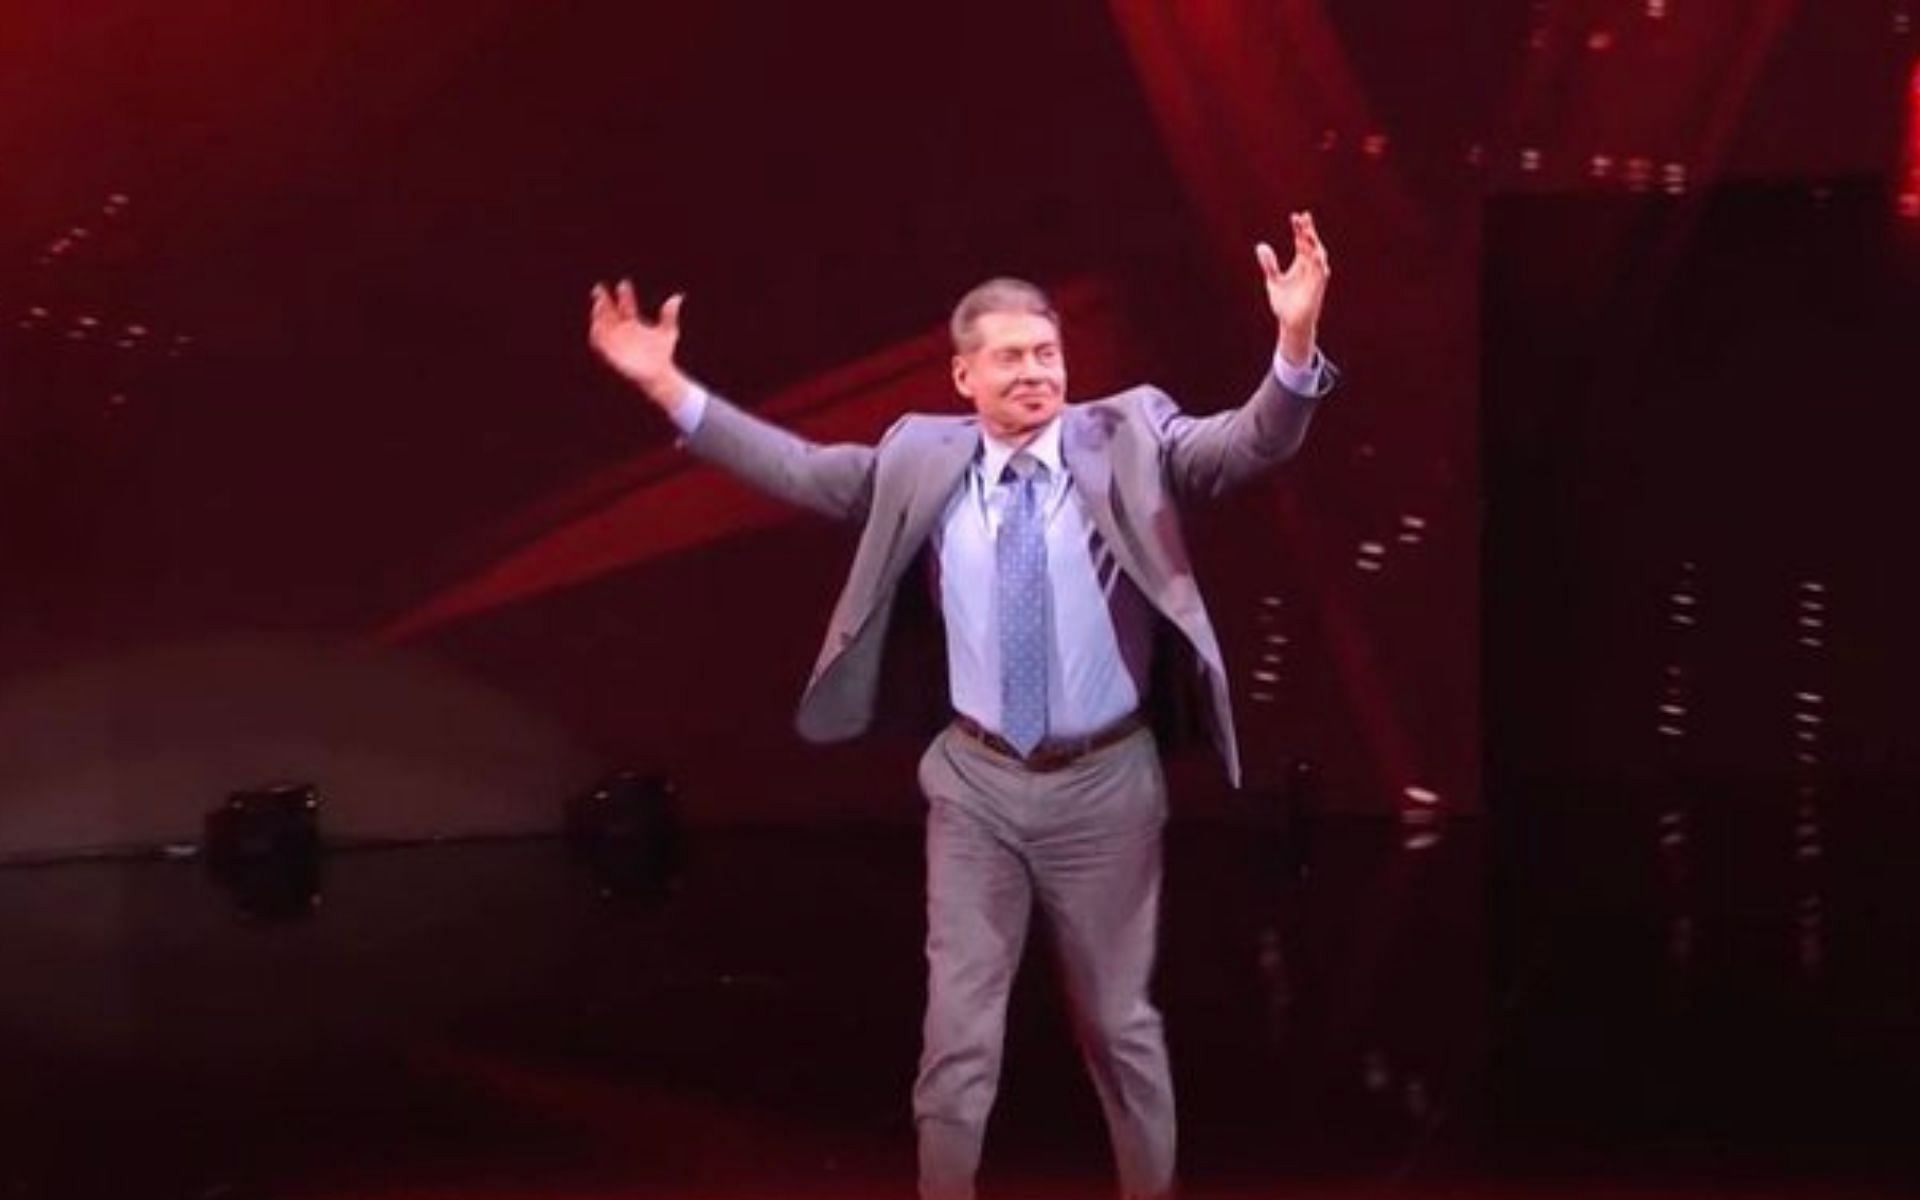 Mr. McMahon surprised fans with an appearance on RAW